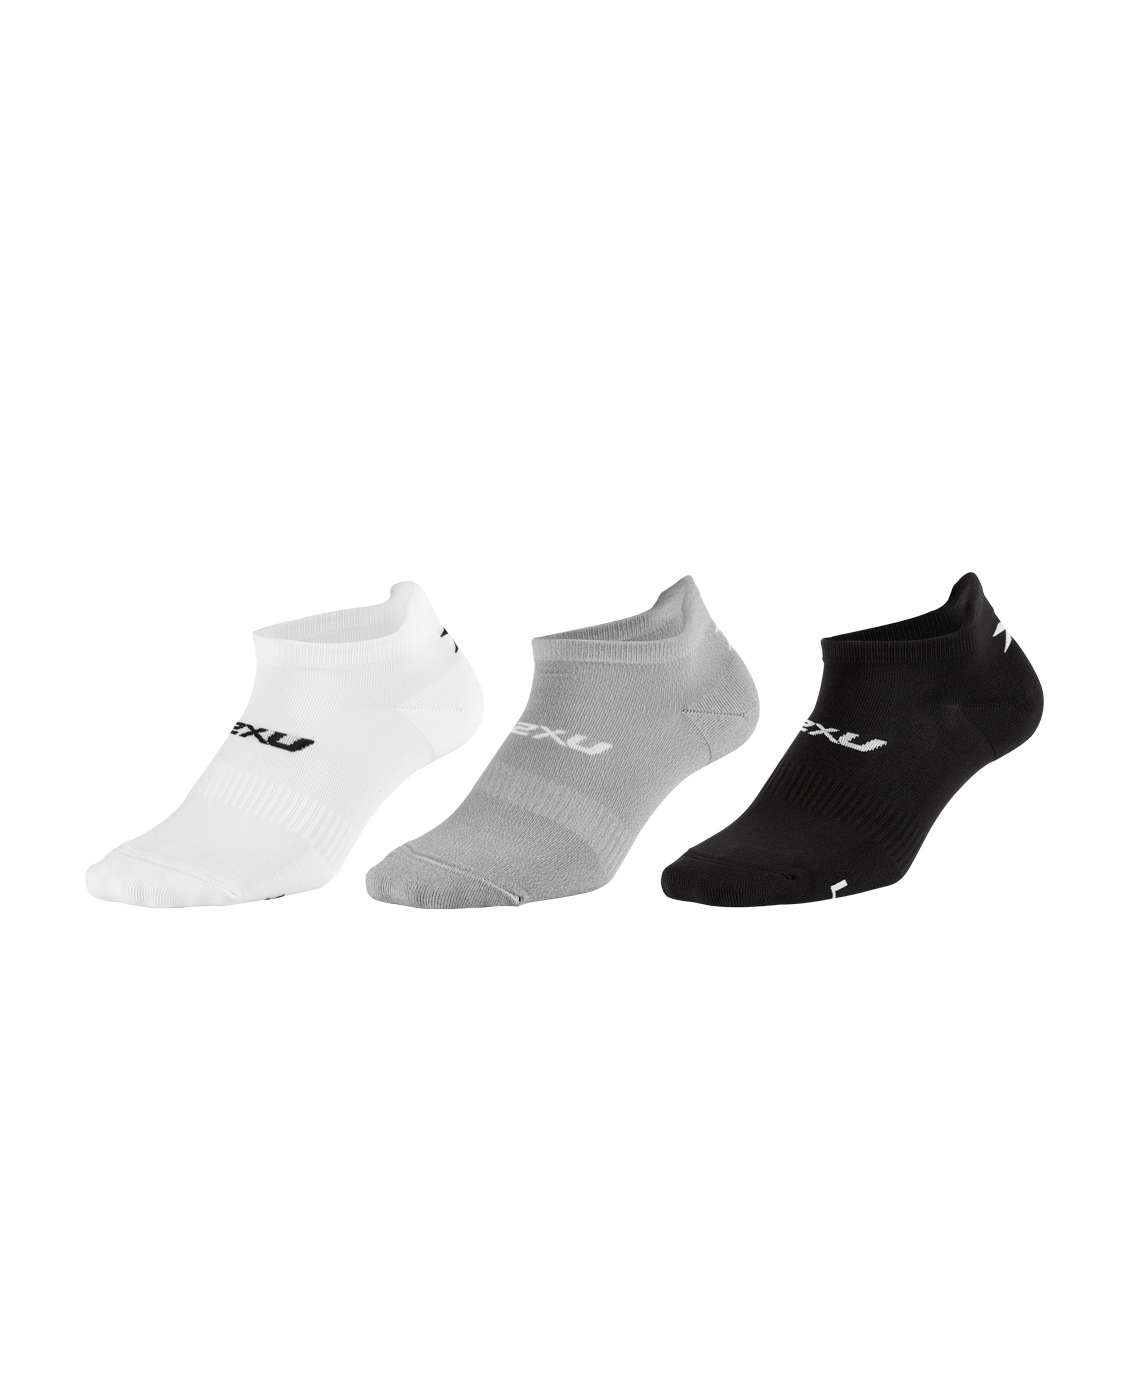 2XU Unisex Ankle Sock 3 Pack - Three Color